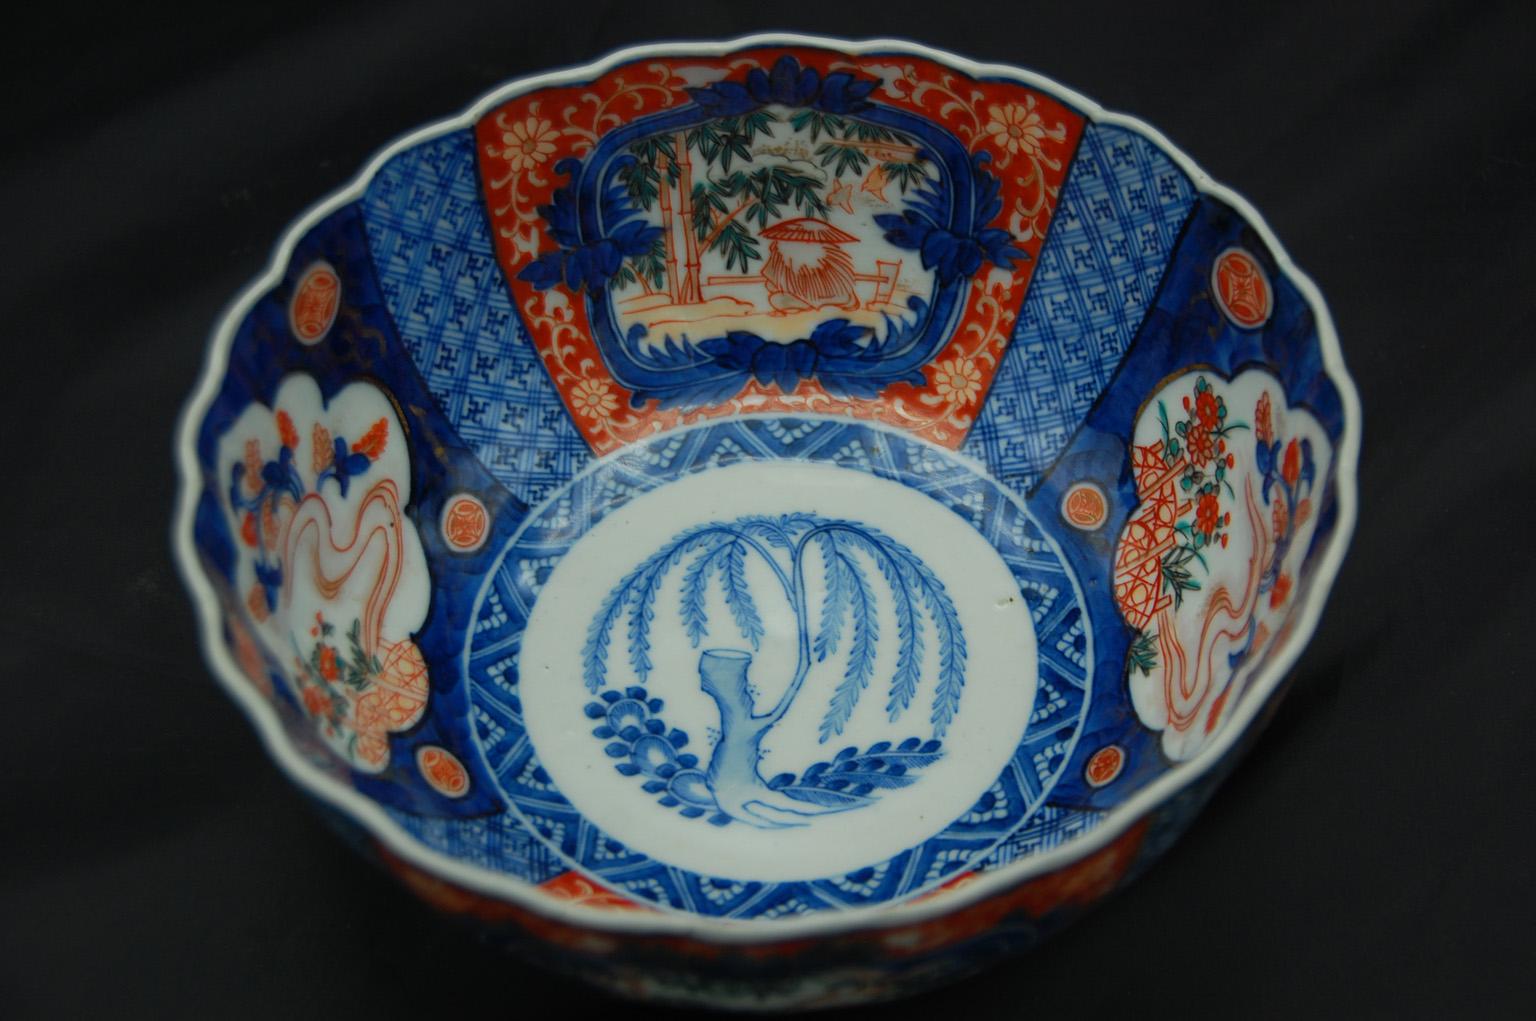 Japanese 19th century Meiji period Imari 7 1/2 inch scalloped bowl with Classic underglaze blue and overglaze iron red with touches of green and highlights in gold decoration. The central weeping willow motif shows the rebirth of life with a new